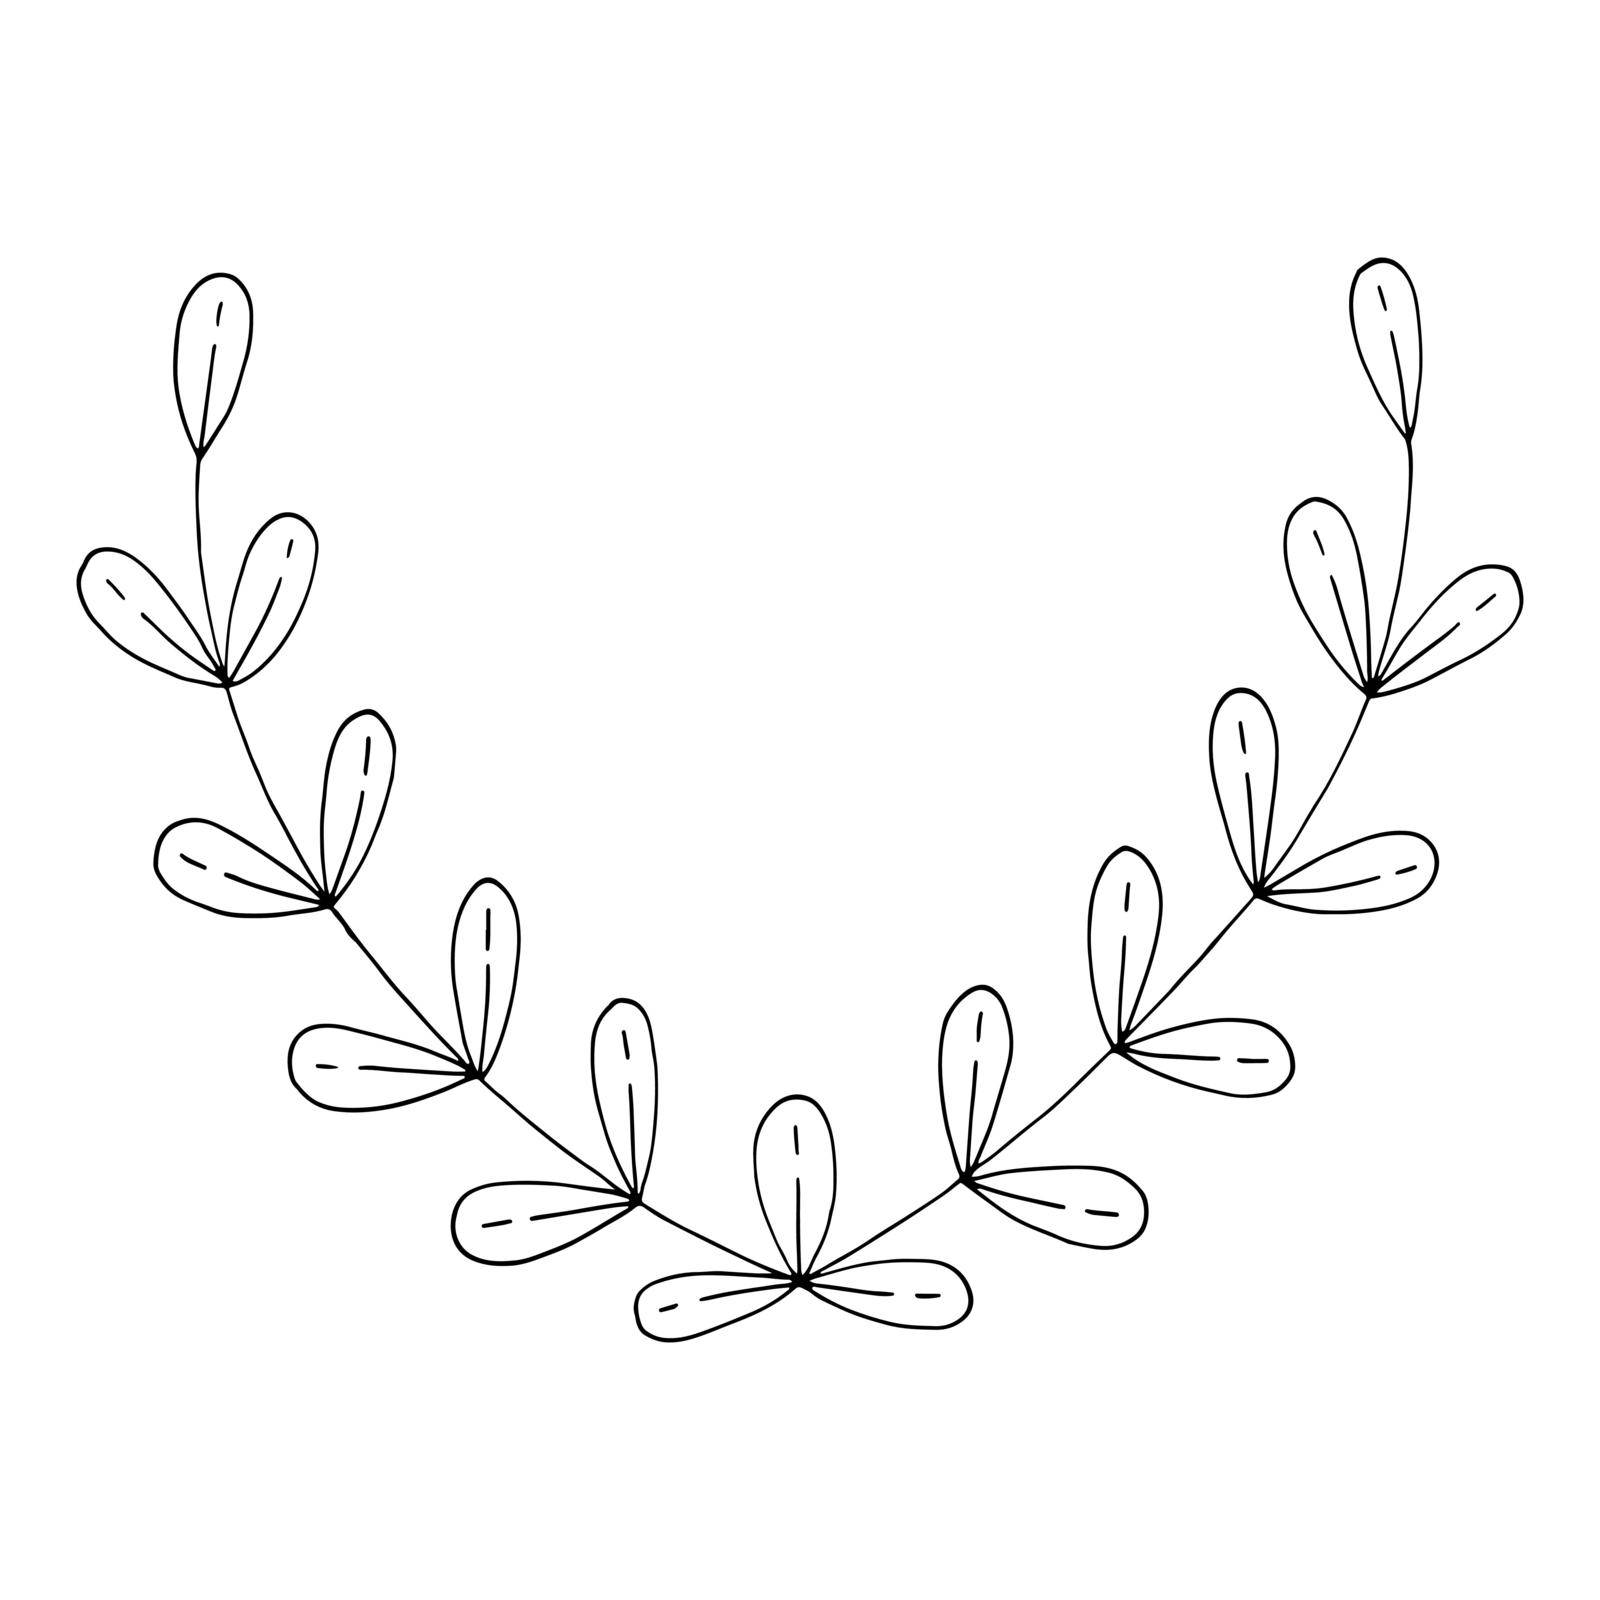 Coloring book laurel wreath line art. Plant branch with leaves. Hand drawn vector black and white illustration.